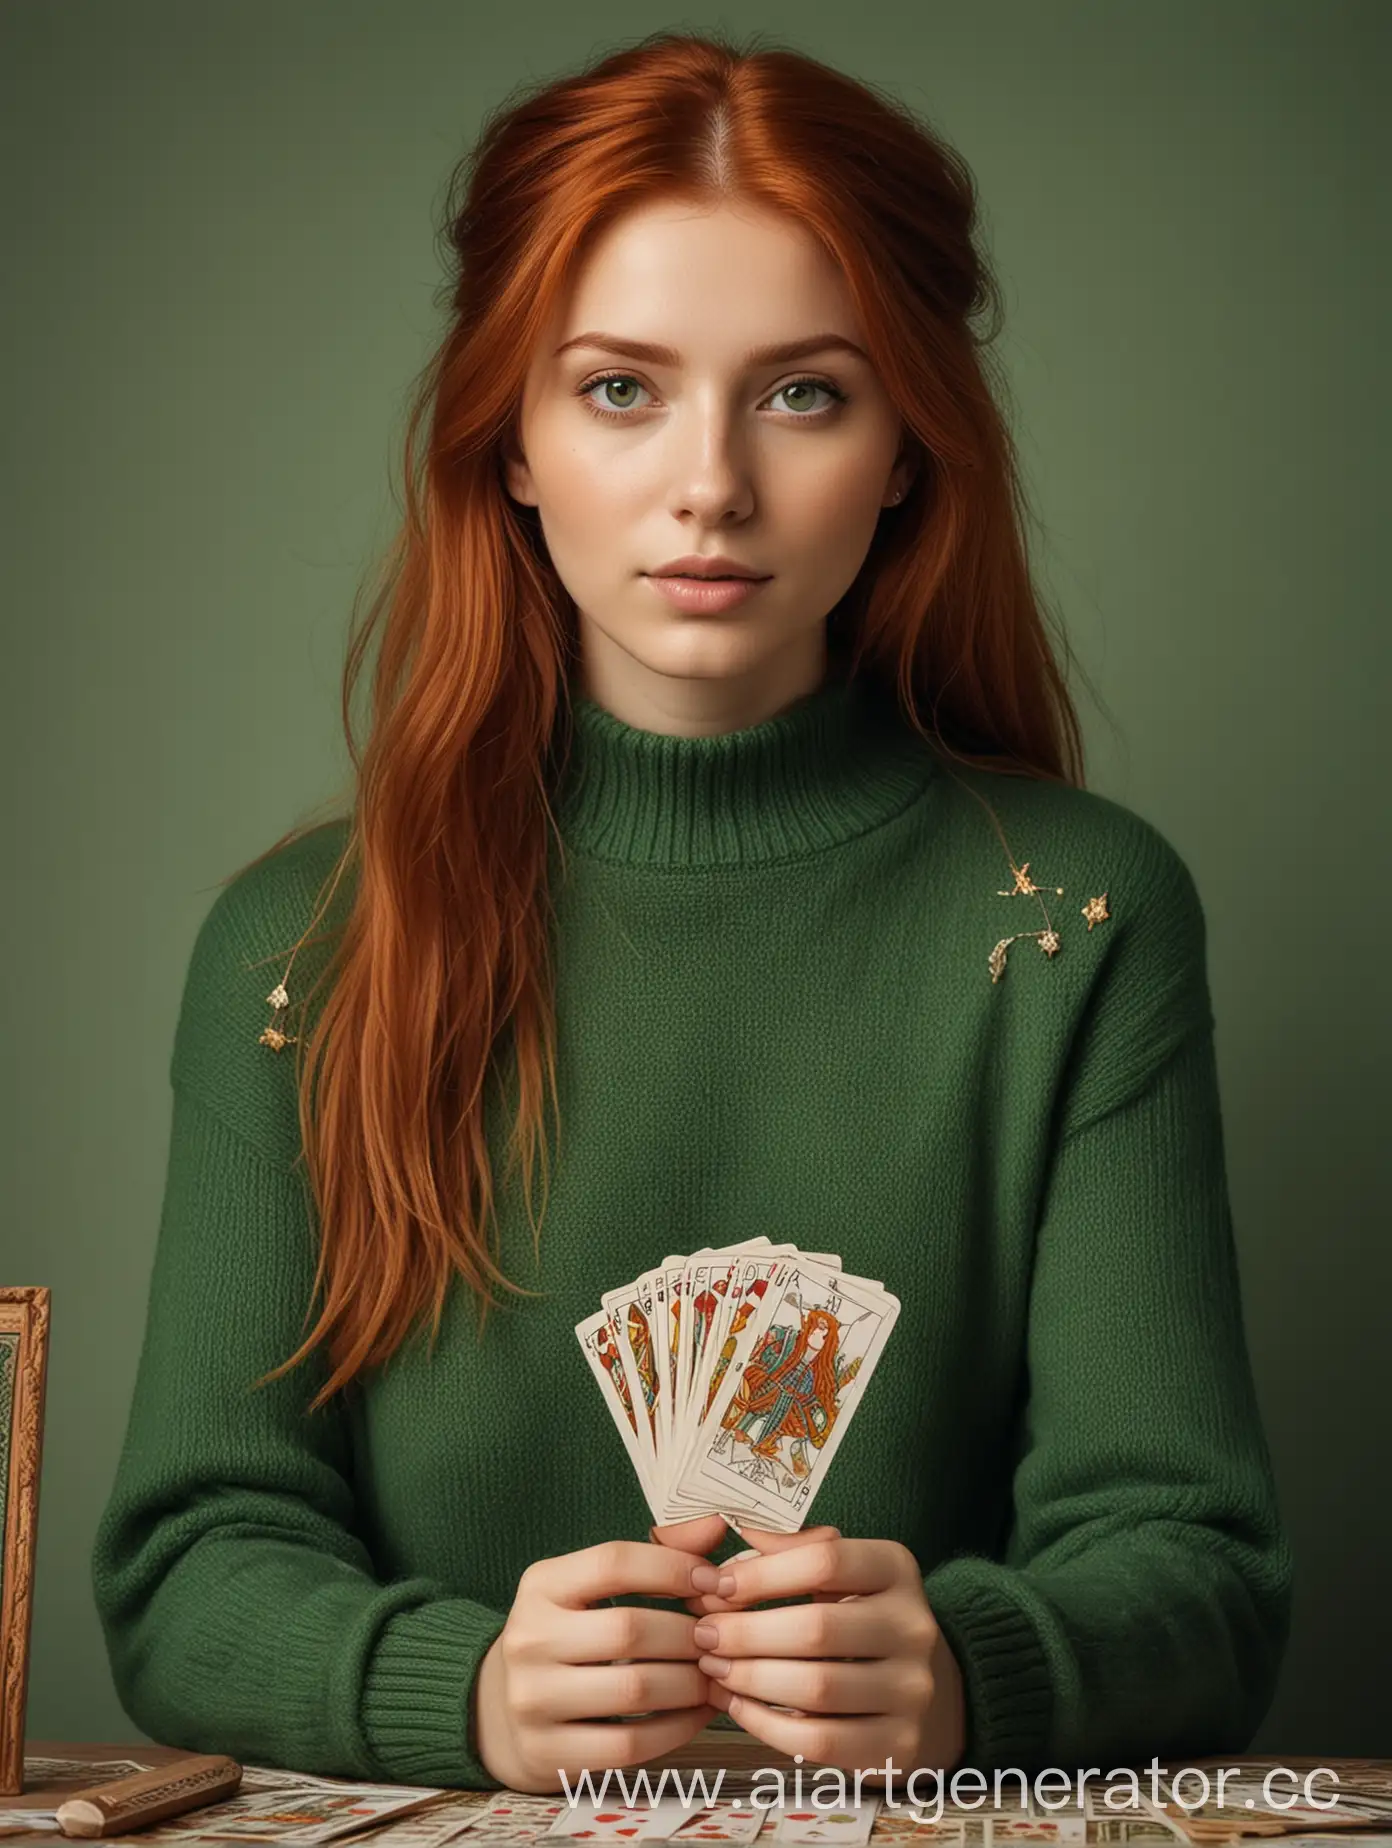 RedHaired-Girl-Holding-Tarot-Cards-in-Green-Sweater